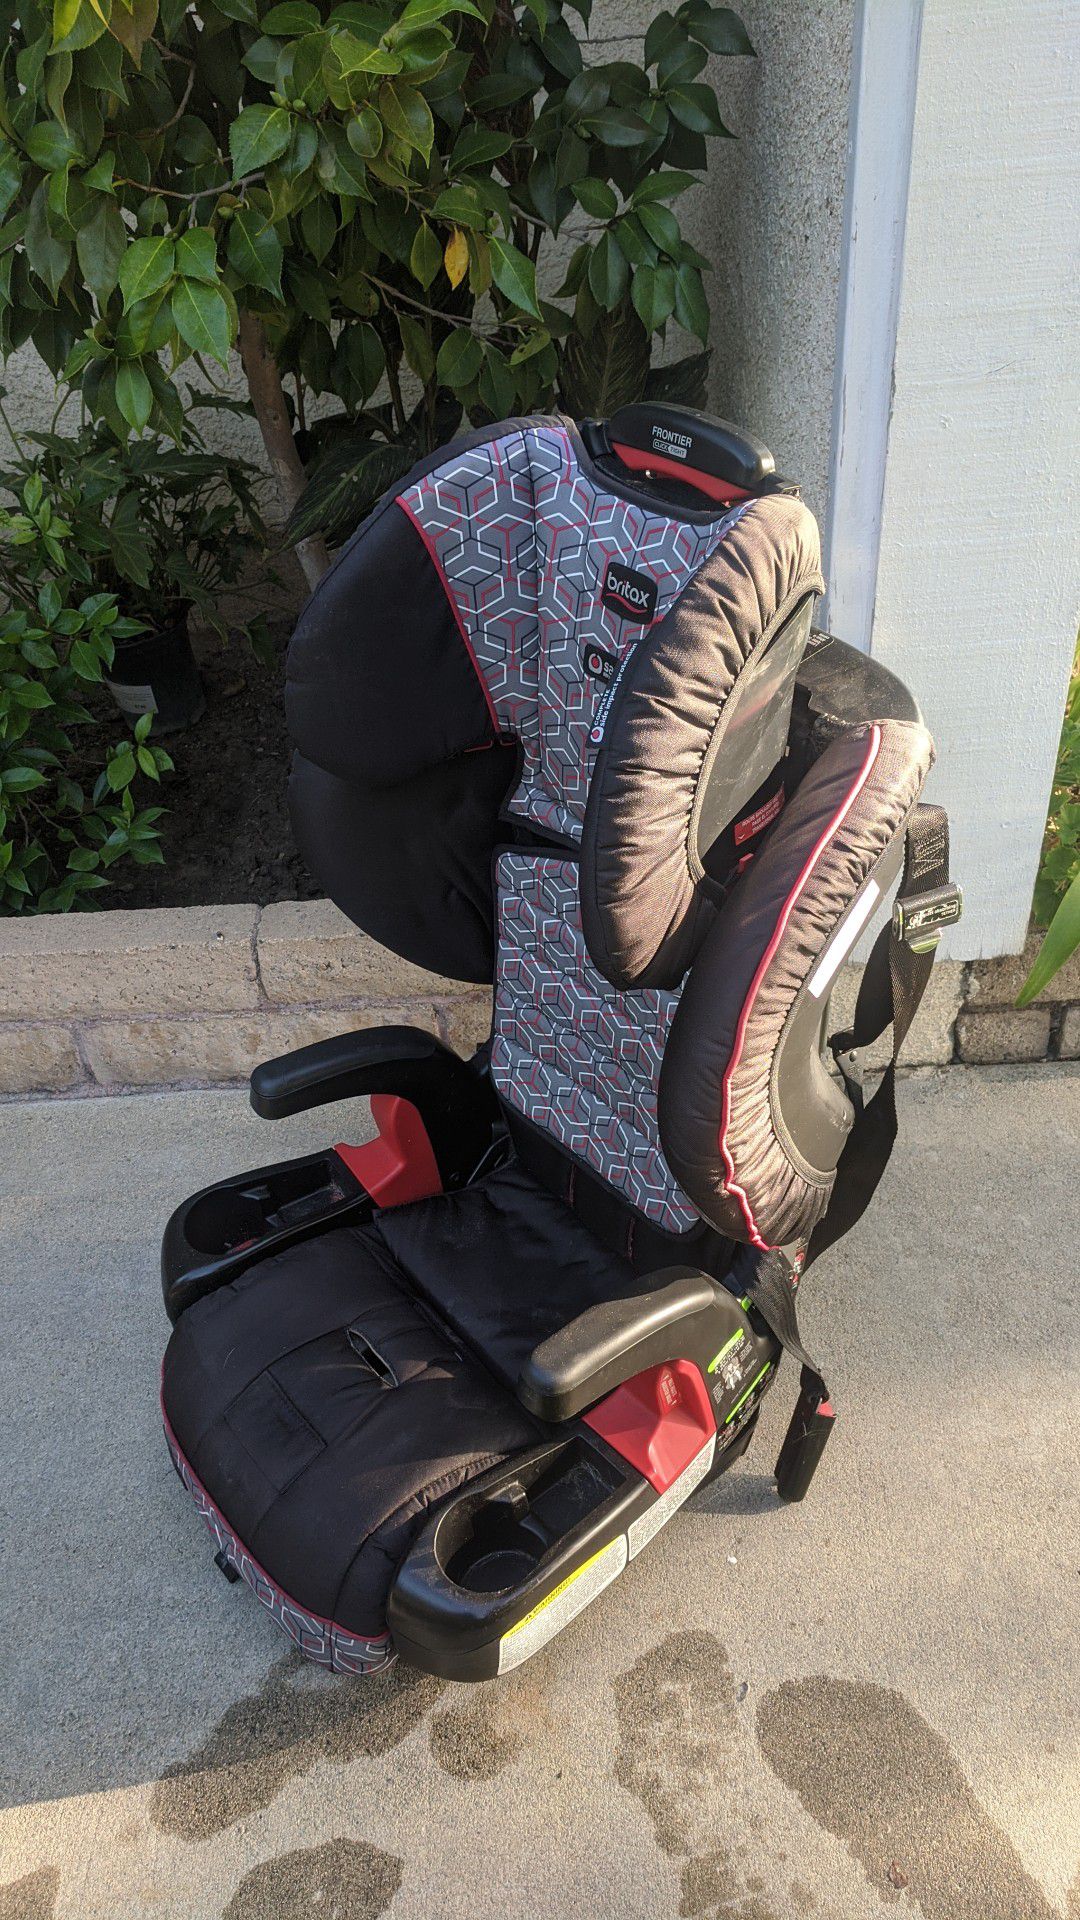 Two Britax Frontier Car Seats. Missing chest harness but can be used as protective booster seats. Each for $20.